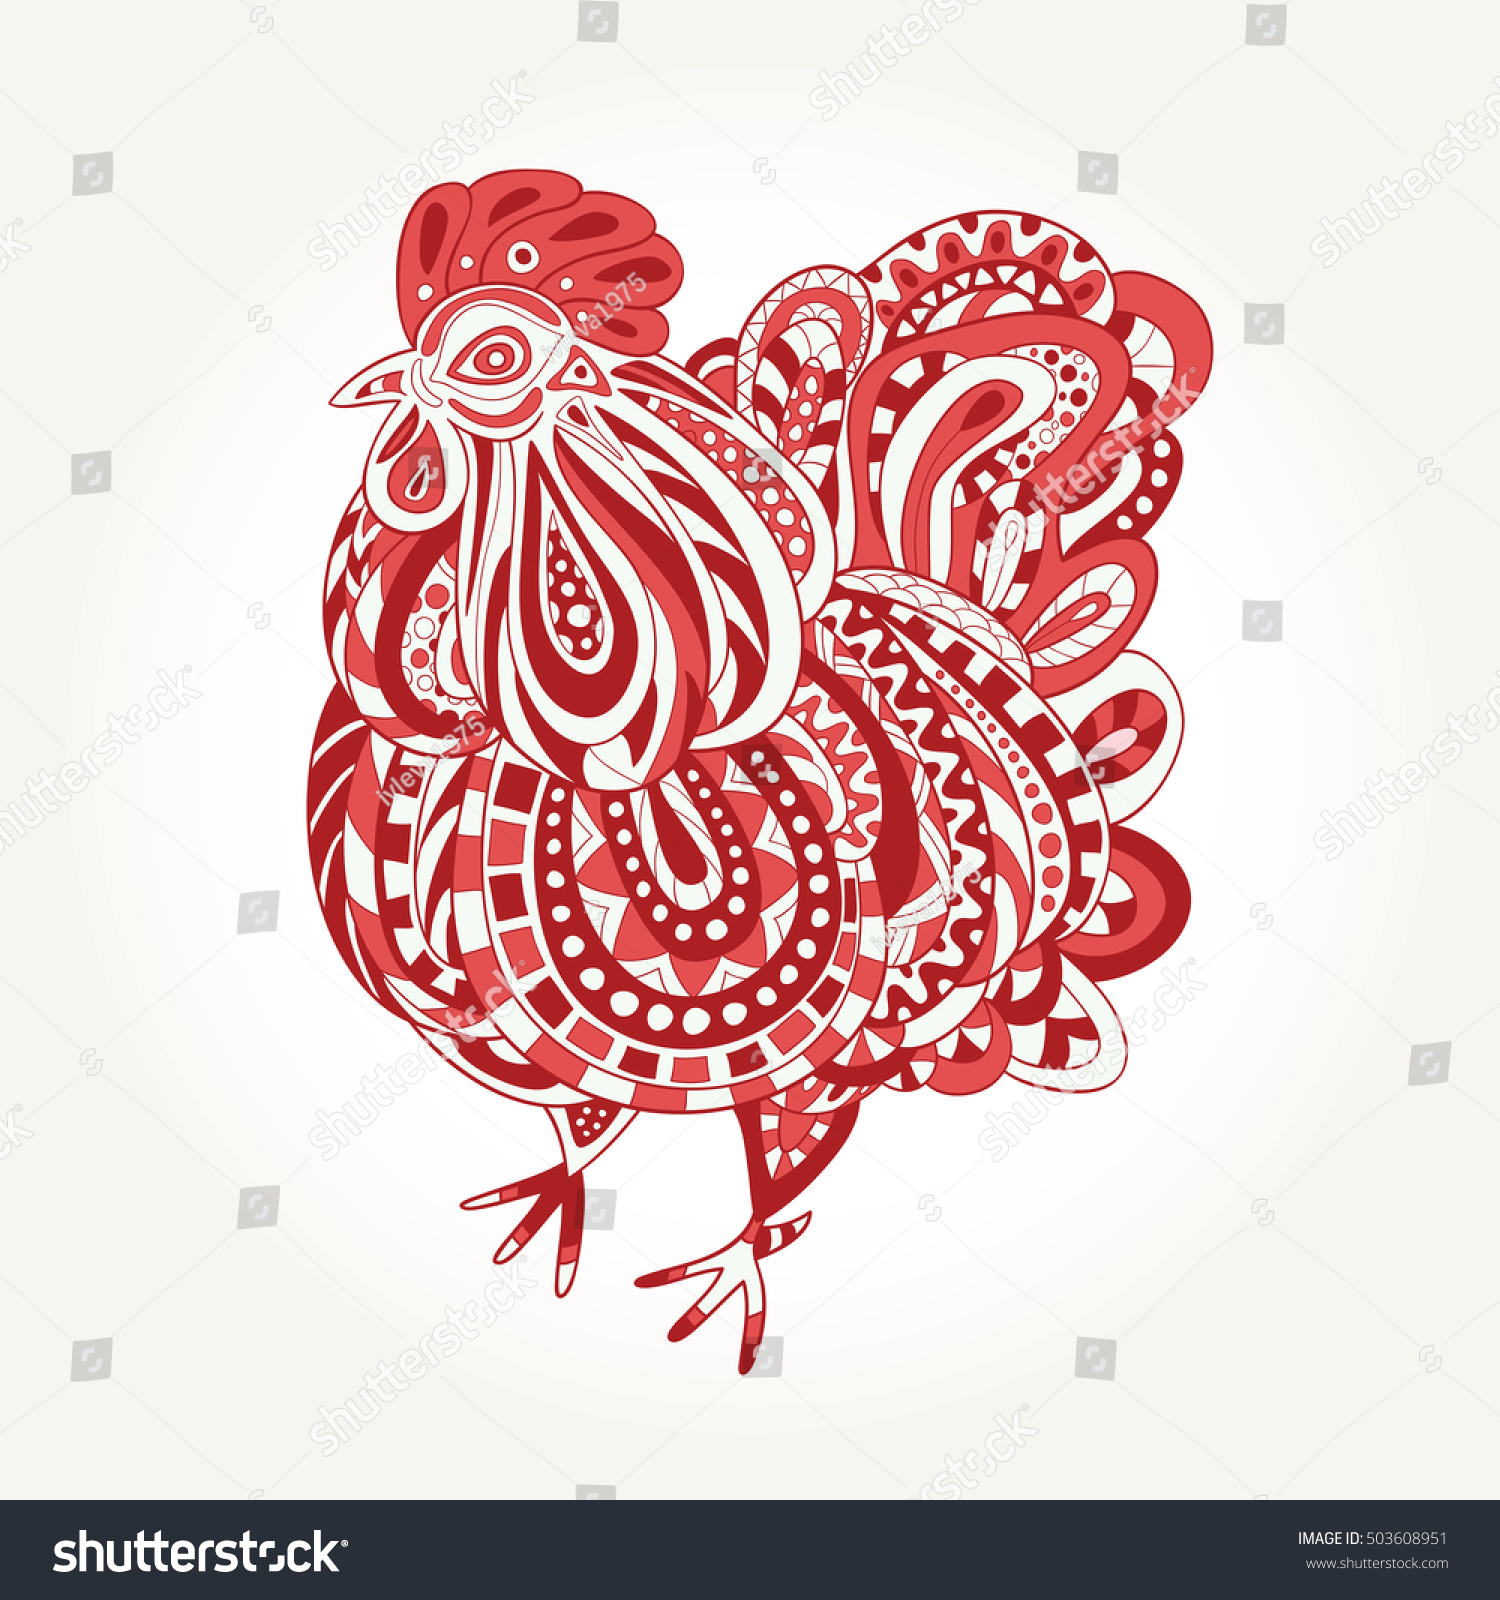 Rooster Handdrawn Painted Style Zentangle Emblem Stock Illustration ...